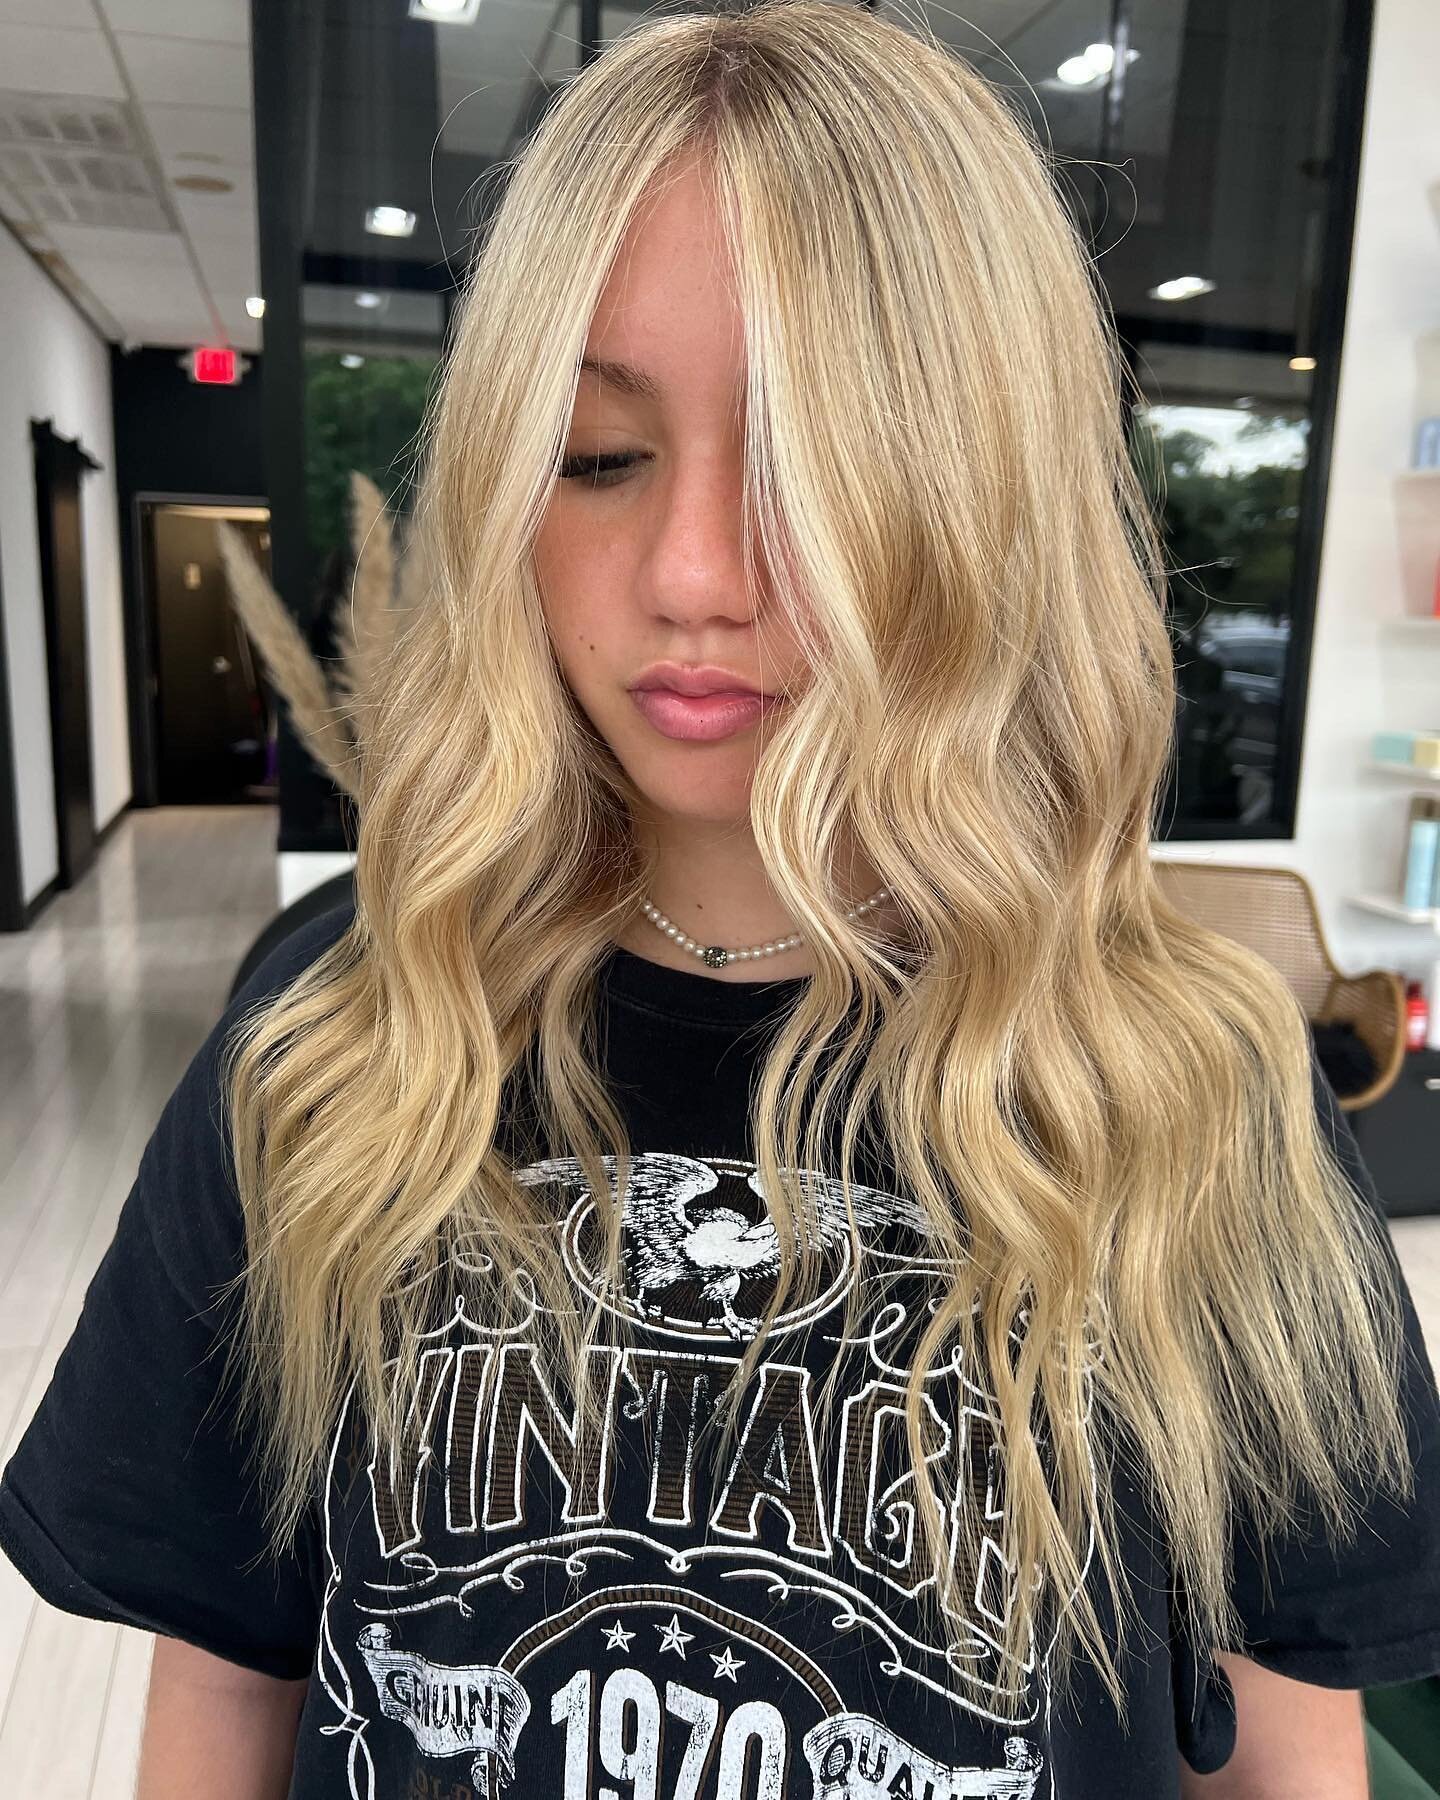 blonde beauty 🔥 

Hair by @kaylee.thestandardhairco 

this is our 2nd session getting out old box color anddd I love!!!!!!! ☺️💞

#houstonhairstylist #babylights #springtexashairstylist #redkenobsessed #redkenshadeseq #redkenlightener #amikahairprod